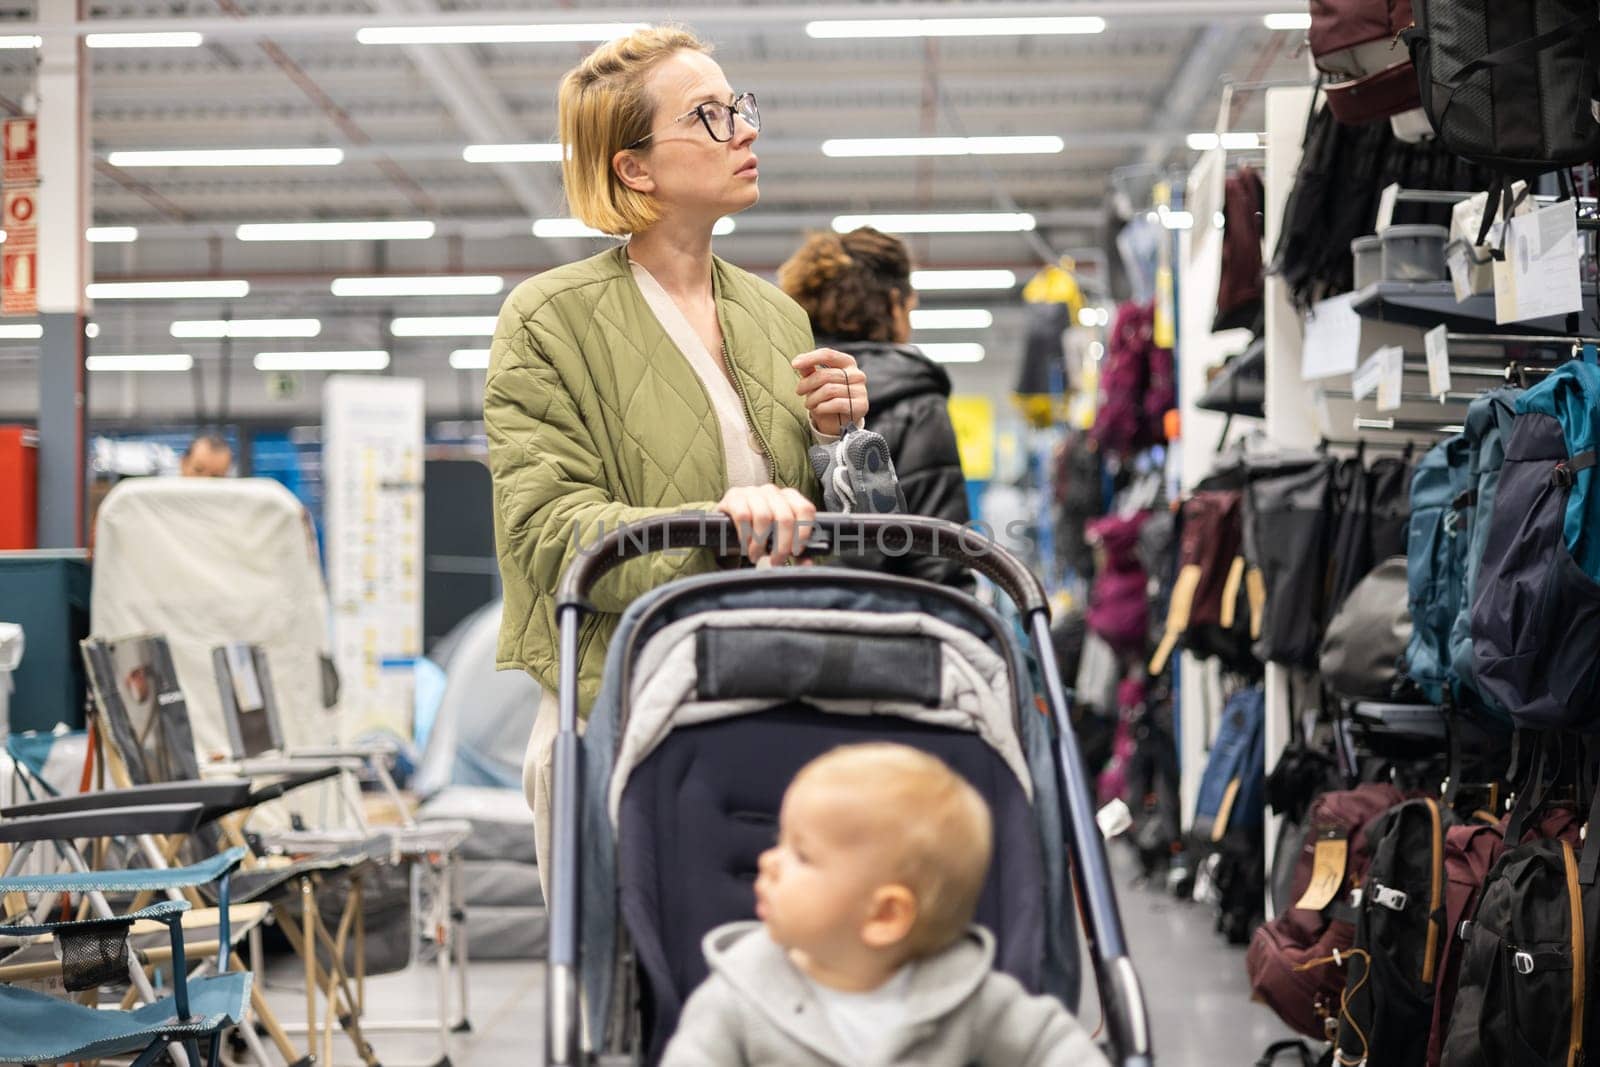 Casualy dressed mother choosing sporty shoes and clothes products in sports department of supermarket store with her infant baby boy child in stroller. by kasto